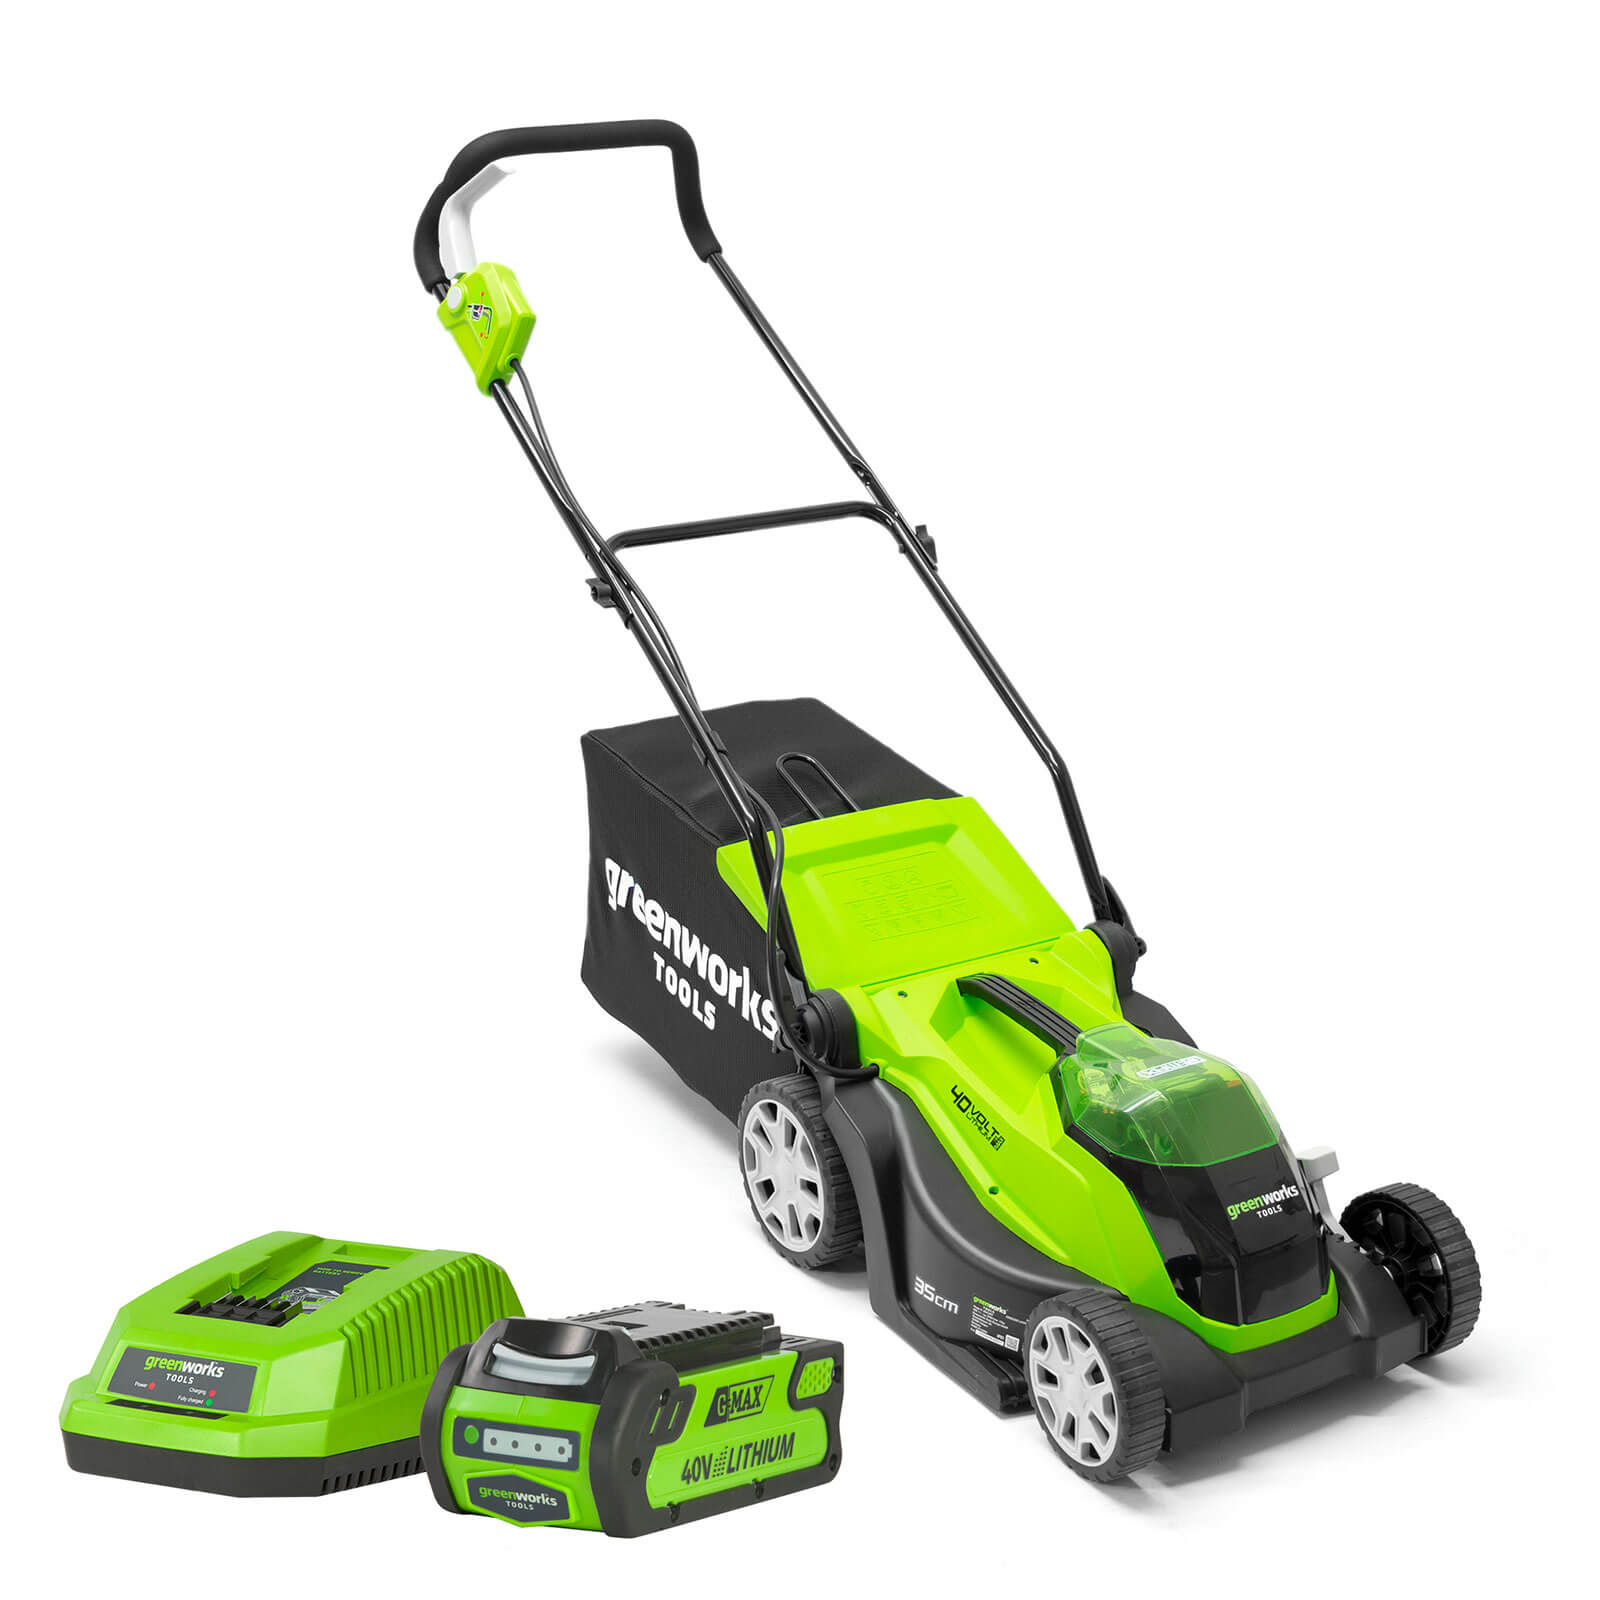 Greenworks G40Lm35K2 Cordless Lawnmower With 2Ah Battery And Charger 35cm 40V